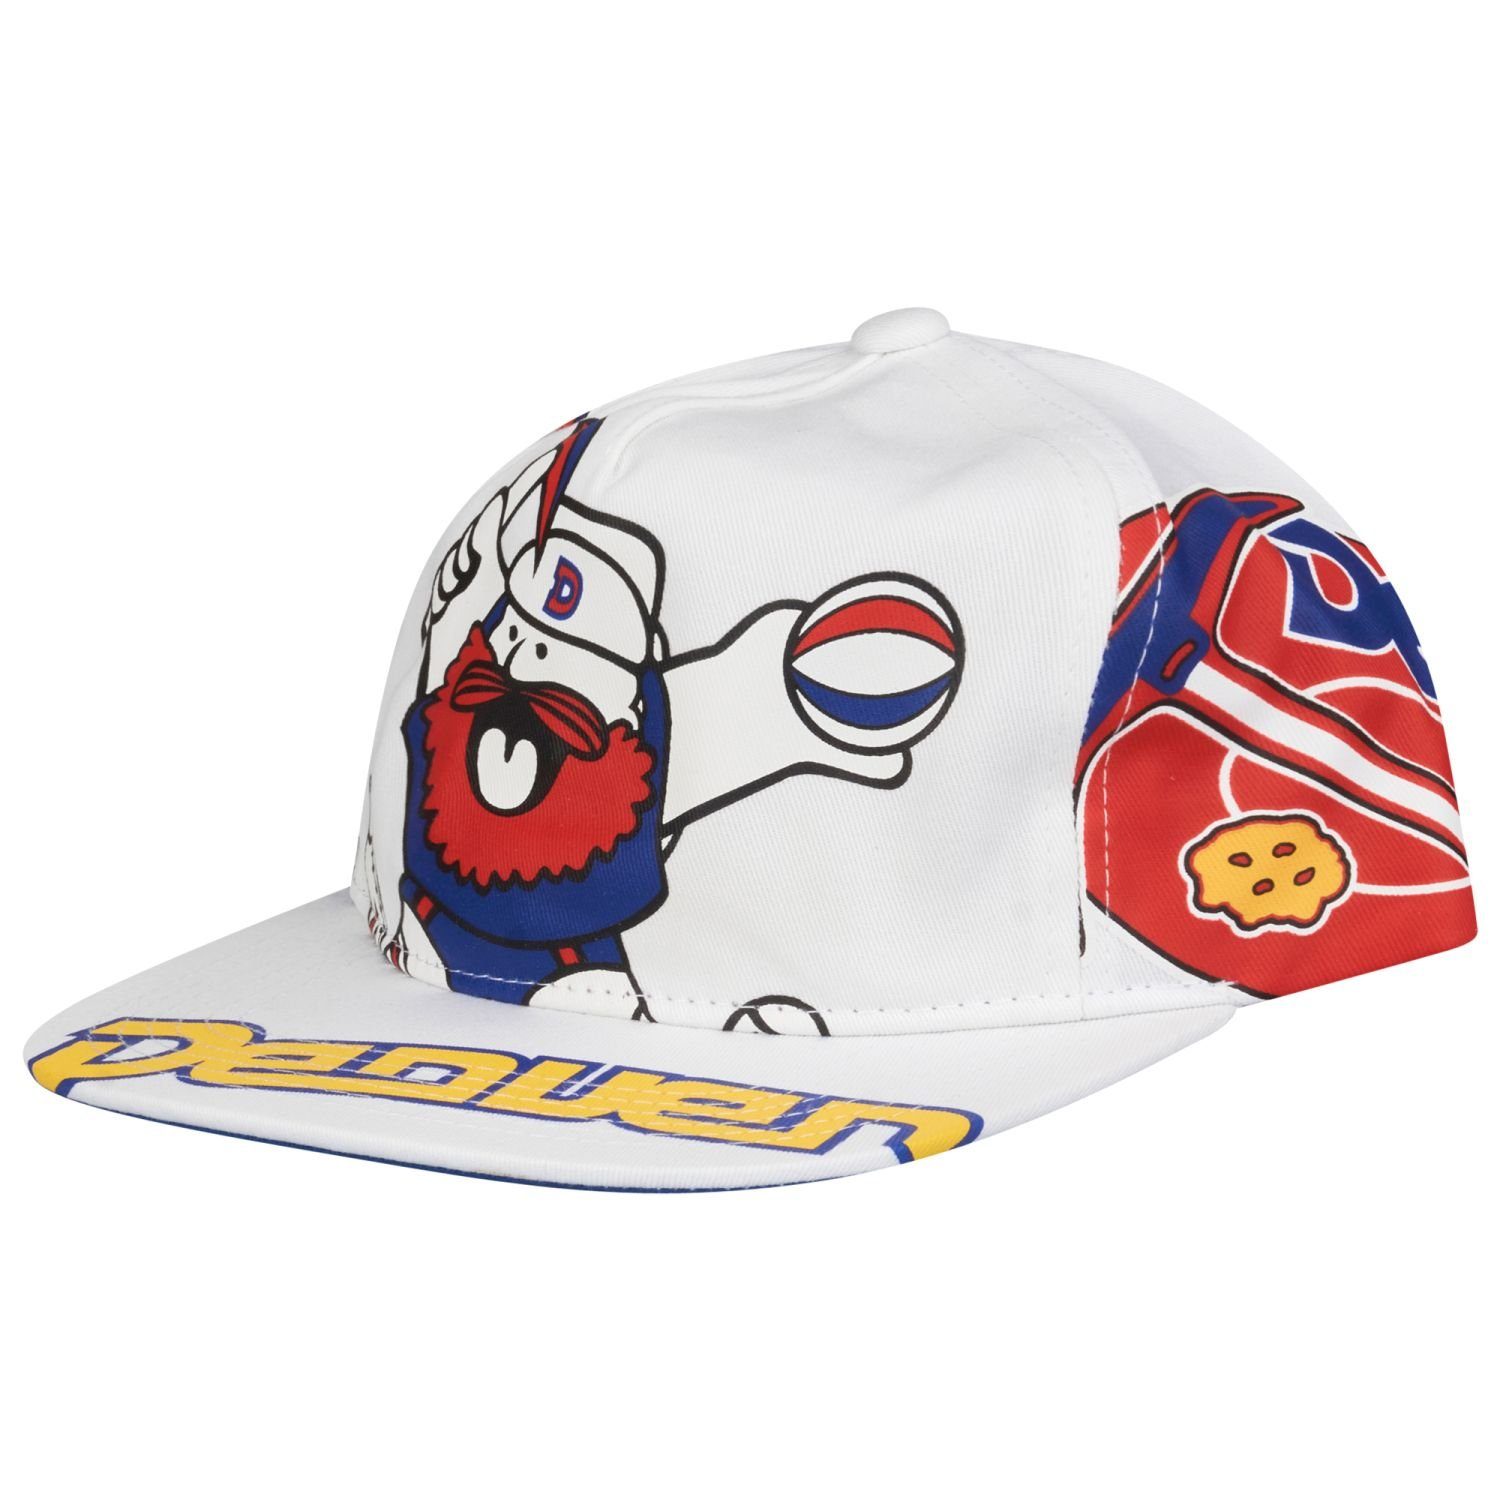 Mitchell & Ness Snapback Cap Unstructured DEADSTOCK Denver Nuggets